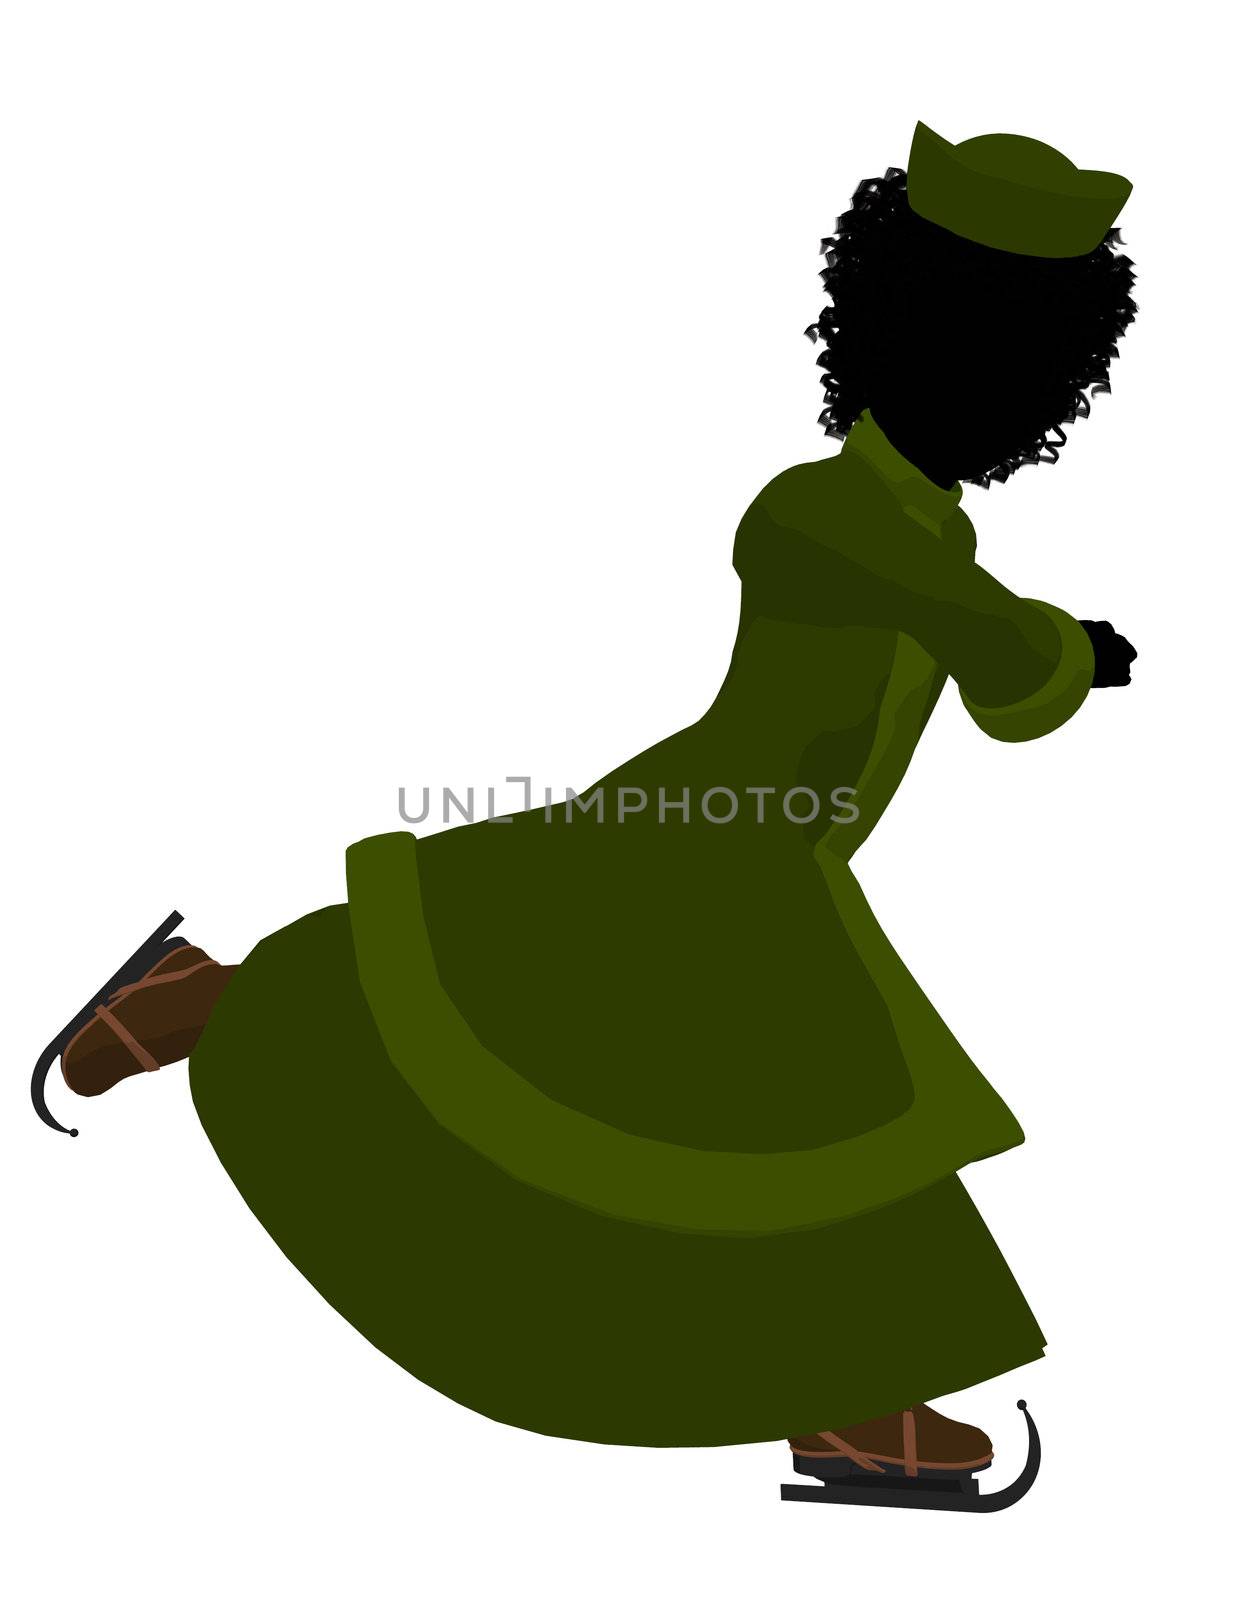 African American Victorian Girl Ice Skating Illustration Silhoue by kathygold